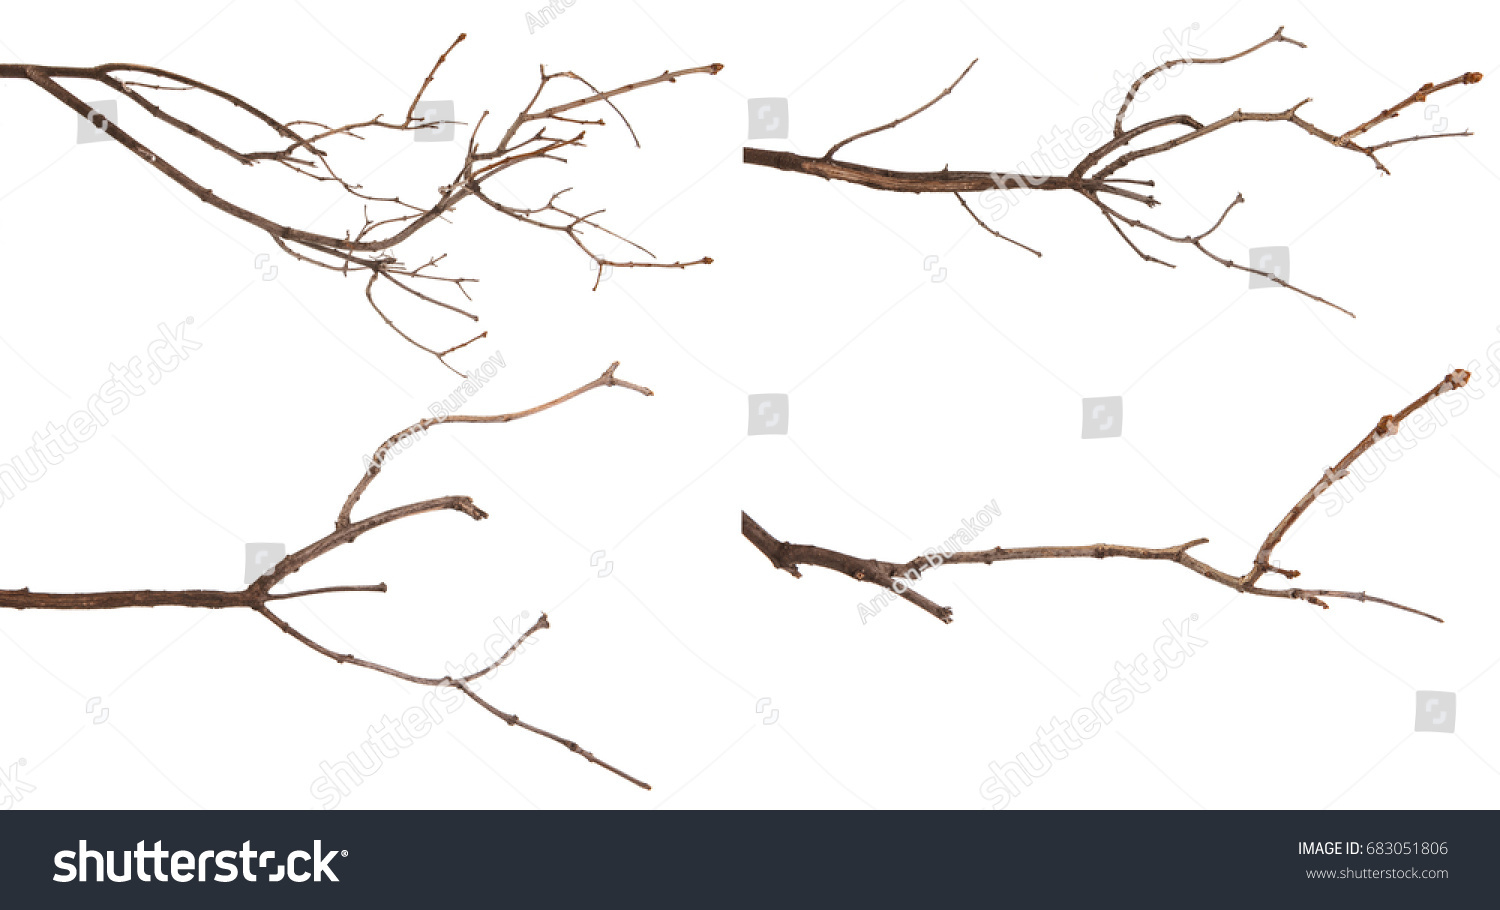 Dry lilac branches isolated on white background. Set #683051806